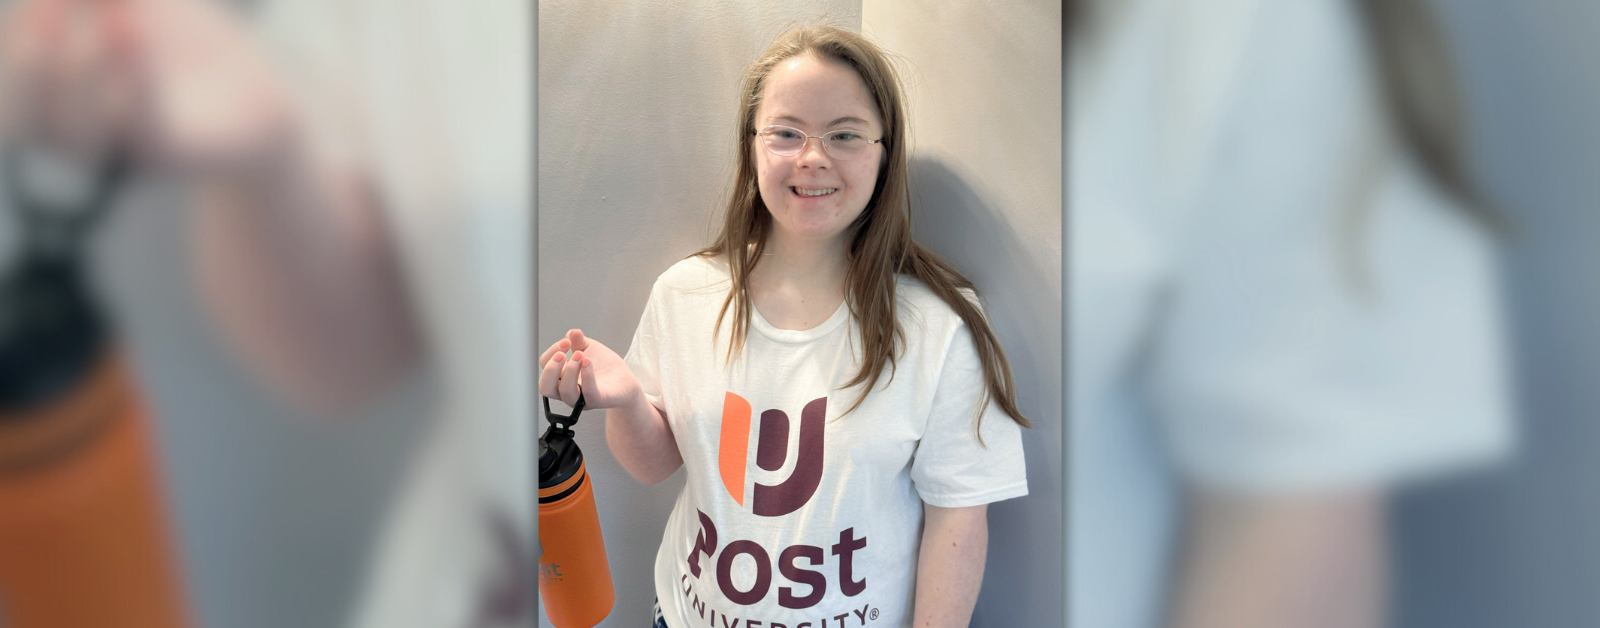 Penny poses inside wearing a Post University t-shirt and holding a Post University orange water bottle as she smiles at the camera